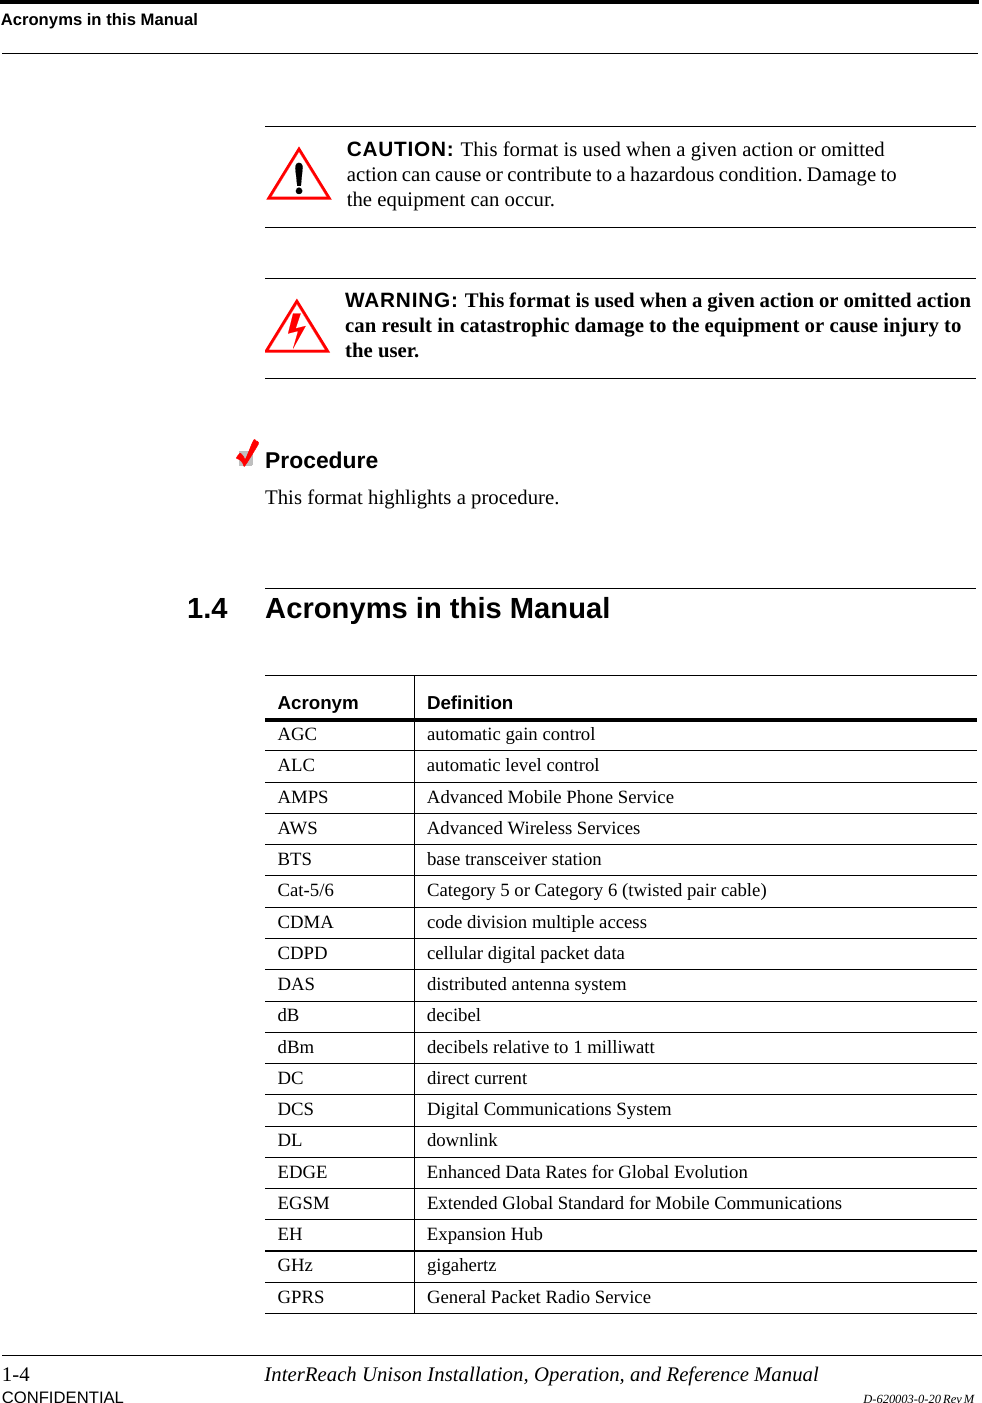 Acronyms in this Manual1-4 InterReach Unison Installation, Operation, and Reference ManualCONFIDENTIAL D-620003-0-20 Rev M CAUTION: This format is used when a given action or omitted action can cause or contribute to a hazardous condition. Damage to the equipment can occur.WARNING: This format is used when a given action or omitted action can result in catastrophic damage to the equipment or cause injury to the user.ProcedureThis format highlights a procedure.1.4 Acronyms in this ManualAcronym DefinitionAGC automatic gain controlALC automatic level controlAMPS Advanced Mobile Phone Service AWS Advanced Wireless ServicesBTS base transceiver stationCat-5/6 Category 5 or Category 6 (twisted pair cable)CDMA code division multiple accessCDPD cellular digital packet dataDAS distributed antenna systemdB decibeldBm decibels relative to 1 milliwattDC direct currentDCS Digital Communications SystemDL downlinkEDGE Enhanced Data Rates for Global Evolution EGSM Extended Global Standard for Mobile CommunicationsEH Expansion HubGHz gigahertzGPRS General Packet Radio Service 